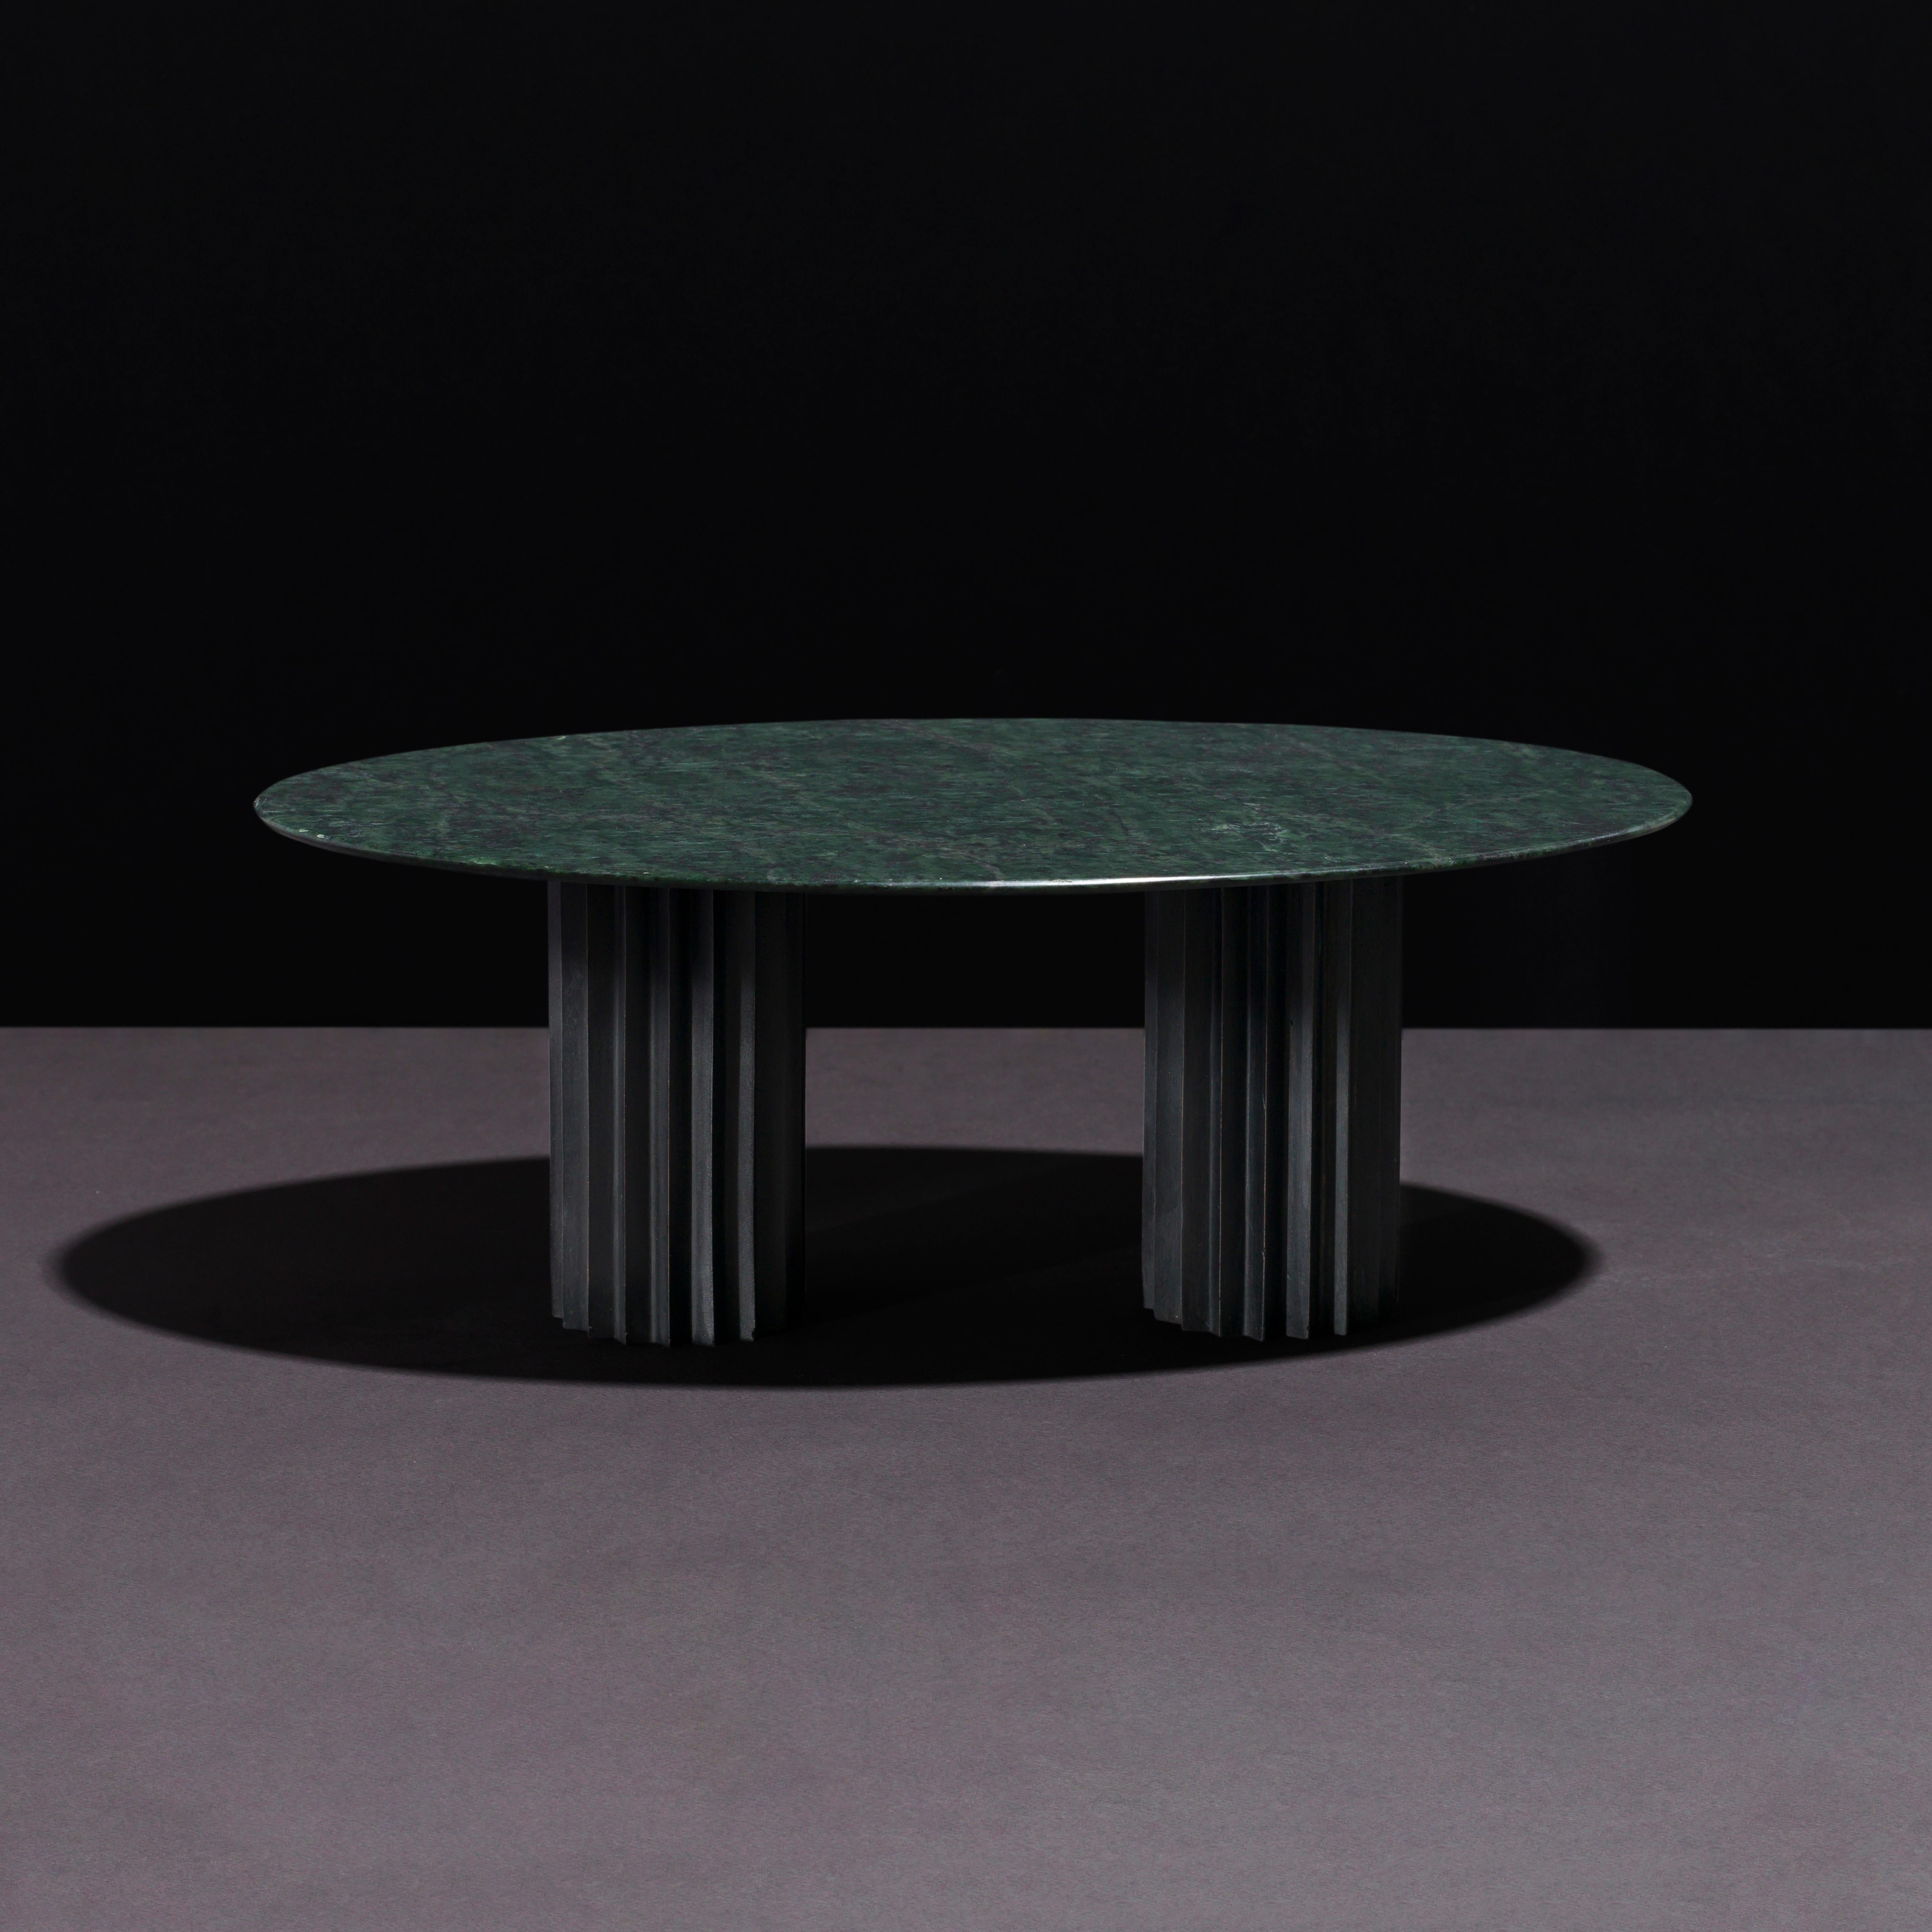 Patinated Doris Green Serpentino Marble Oval Dining Table by Fred and Juul For Sale